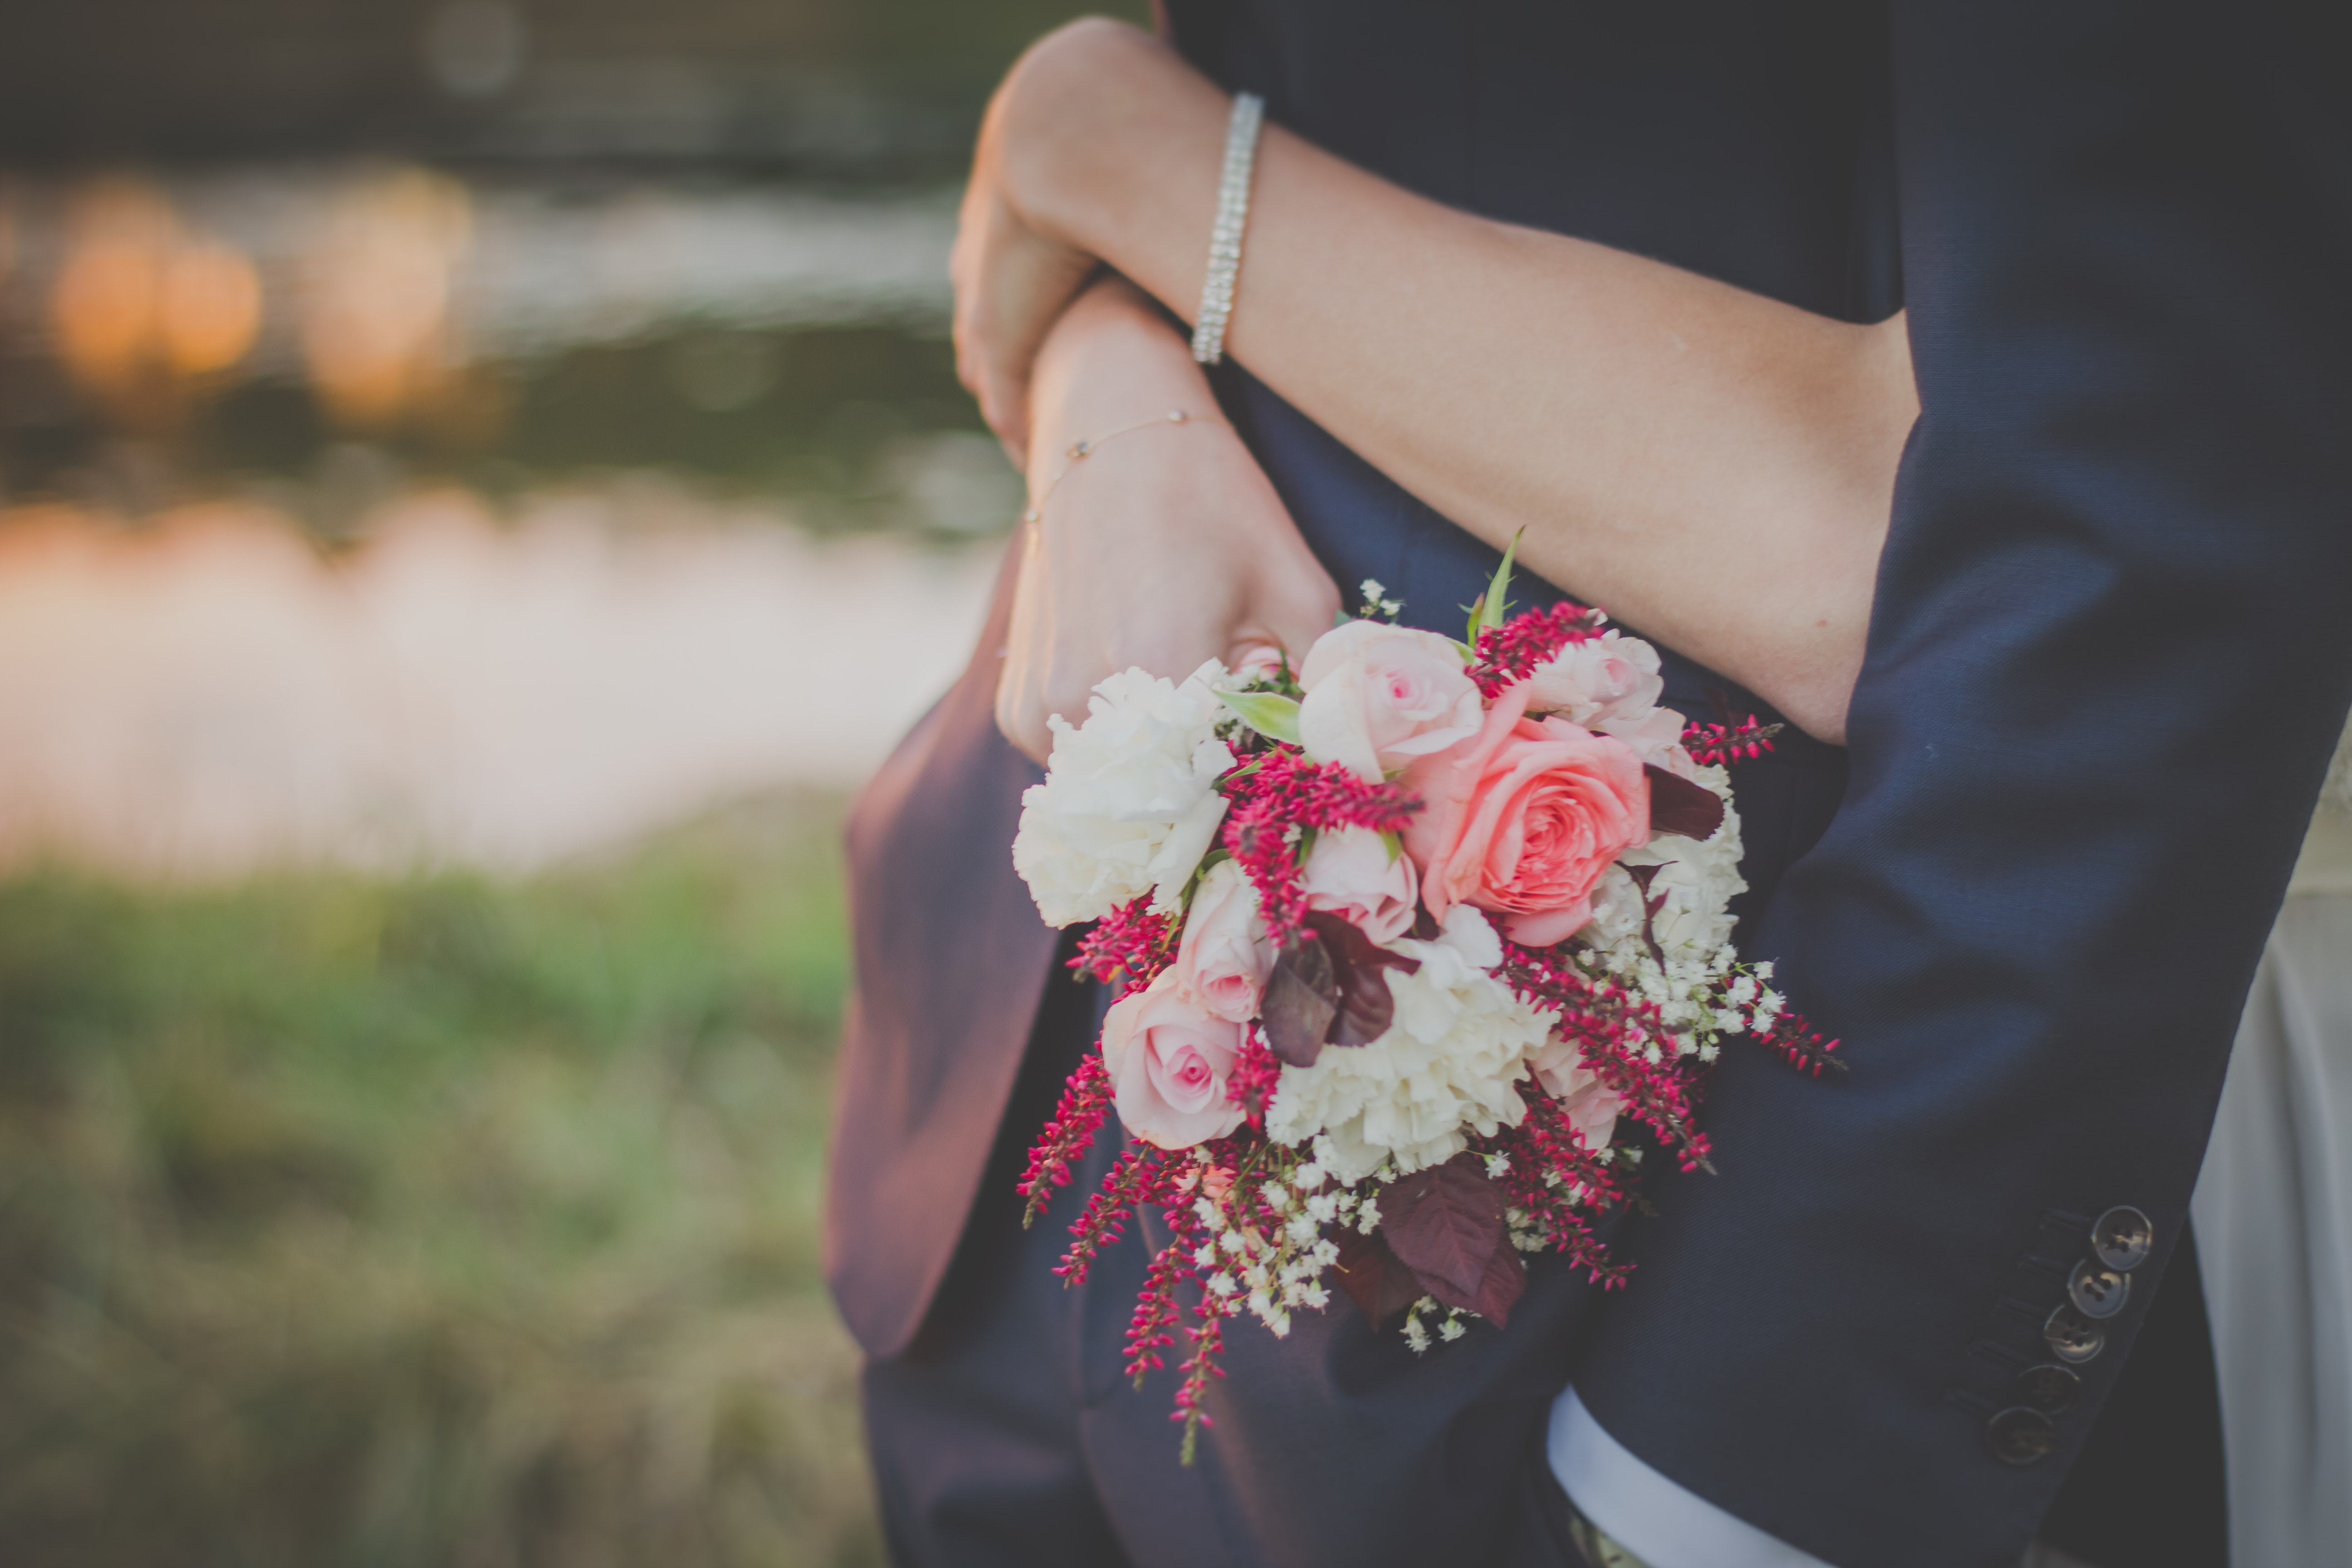 Person holding a bouquet of flower photo